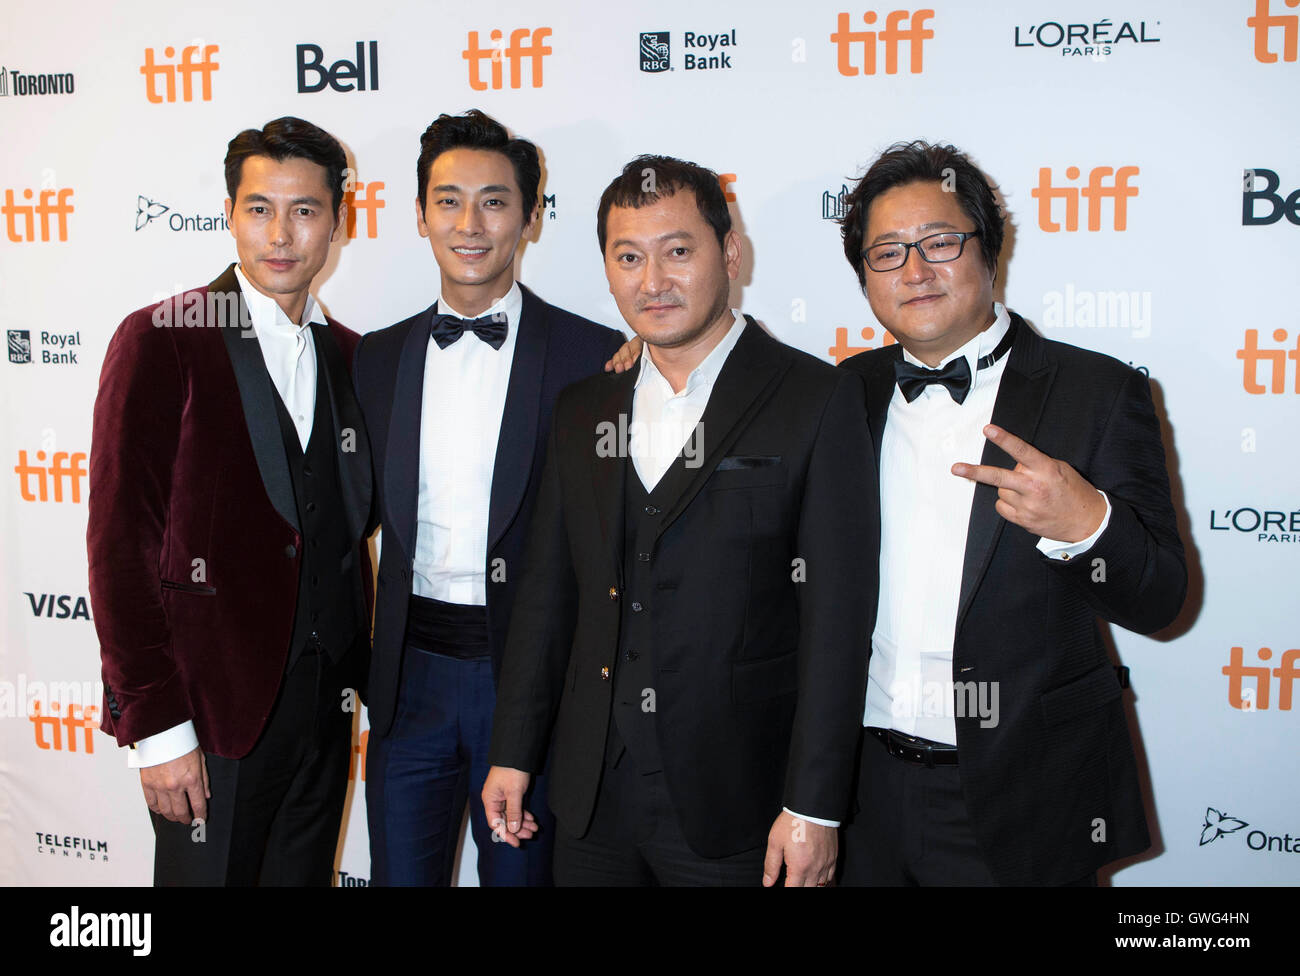 Toronto, Canada. 13th Sep, 2016. South Korean actors Jung Woo-Sung, Ju Ji-hoon, Jung Man-sik and Kwak Do-won (L-R) pose for photos before the world premiere of the film 'Asura: The City of Madness' at the Elgin Theater during the 41st Toronto International Film Festival in Toronto, Canada, Sept. 13, 2016. © Zou Zheng/Xinhua/Alamy Live News Stock Photo